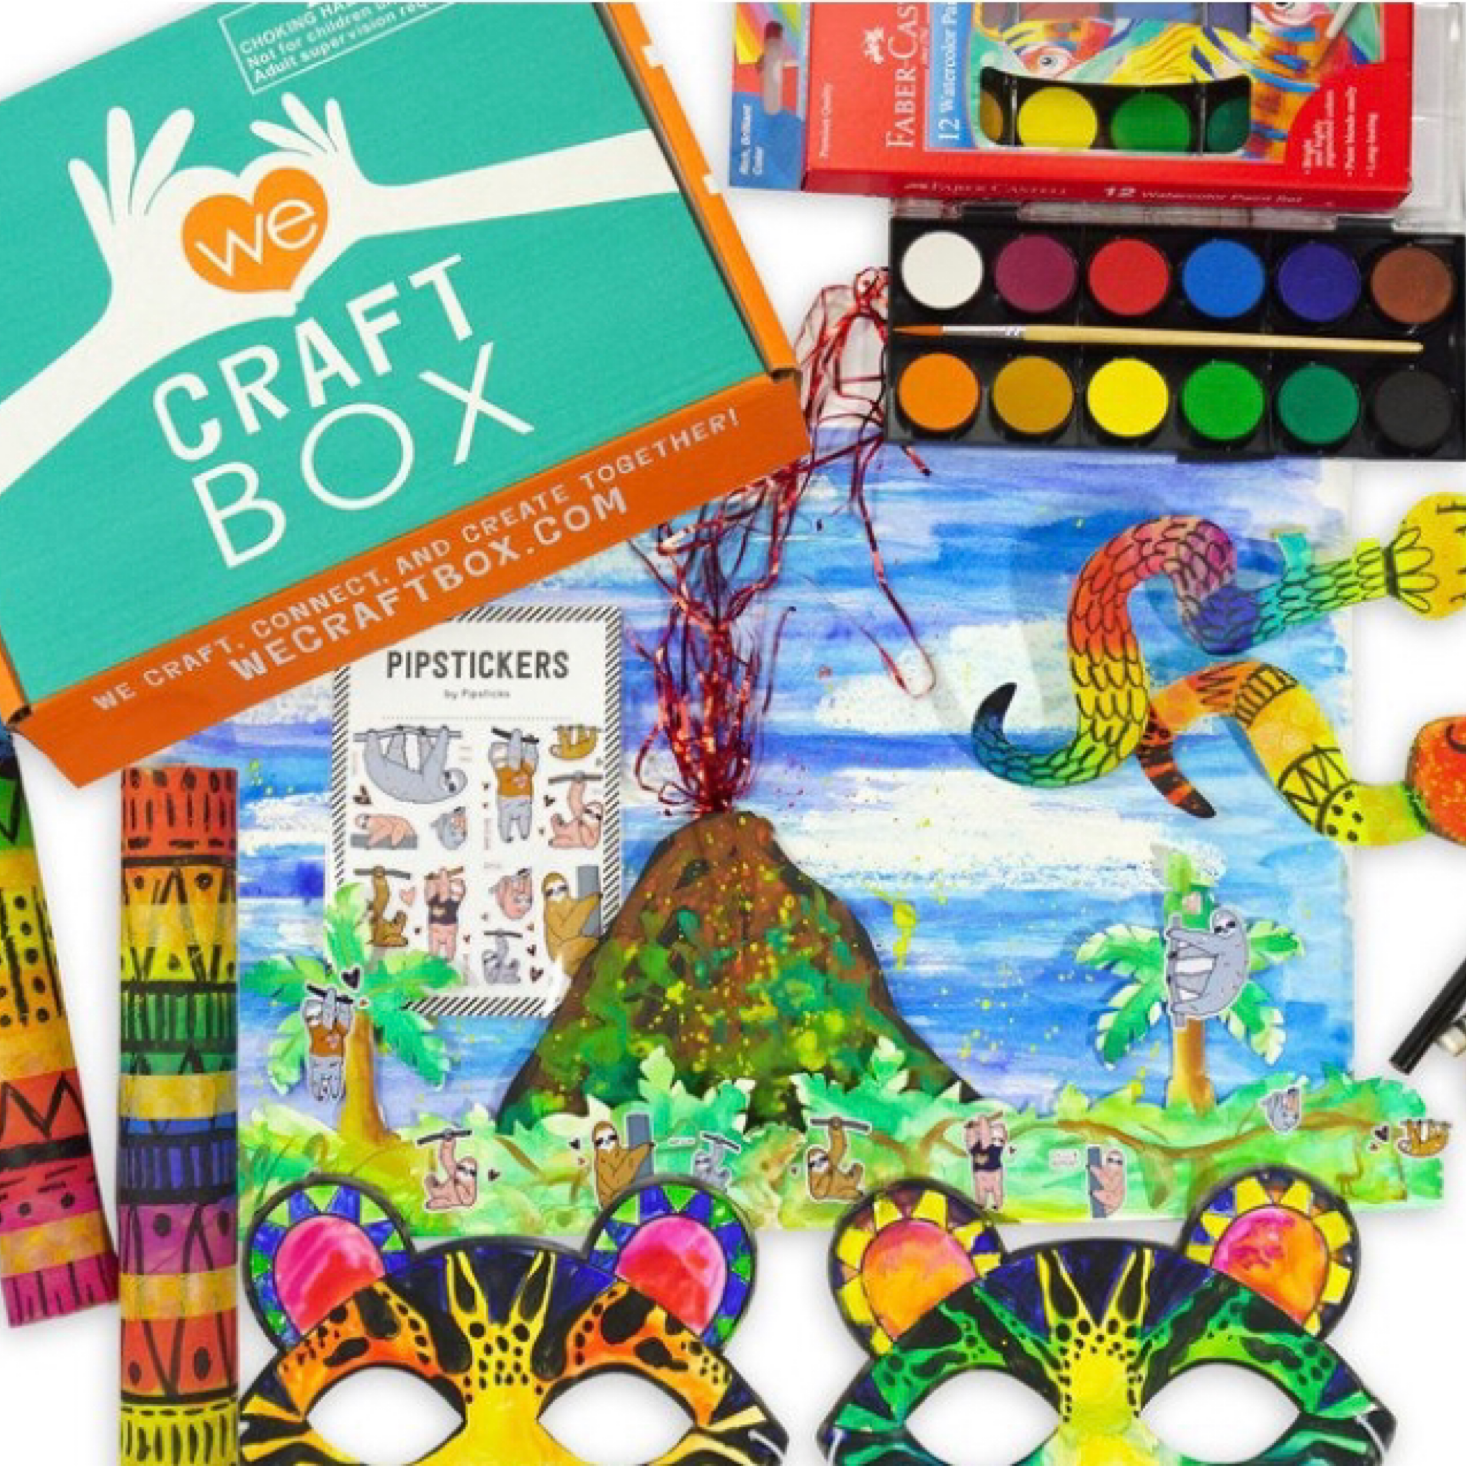 We Craft Box Black Friday Deal – Get a Free Fall Box With Any 6-Month Subscription!